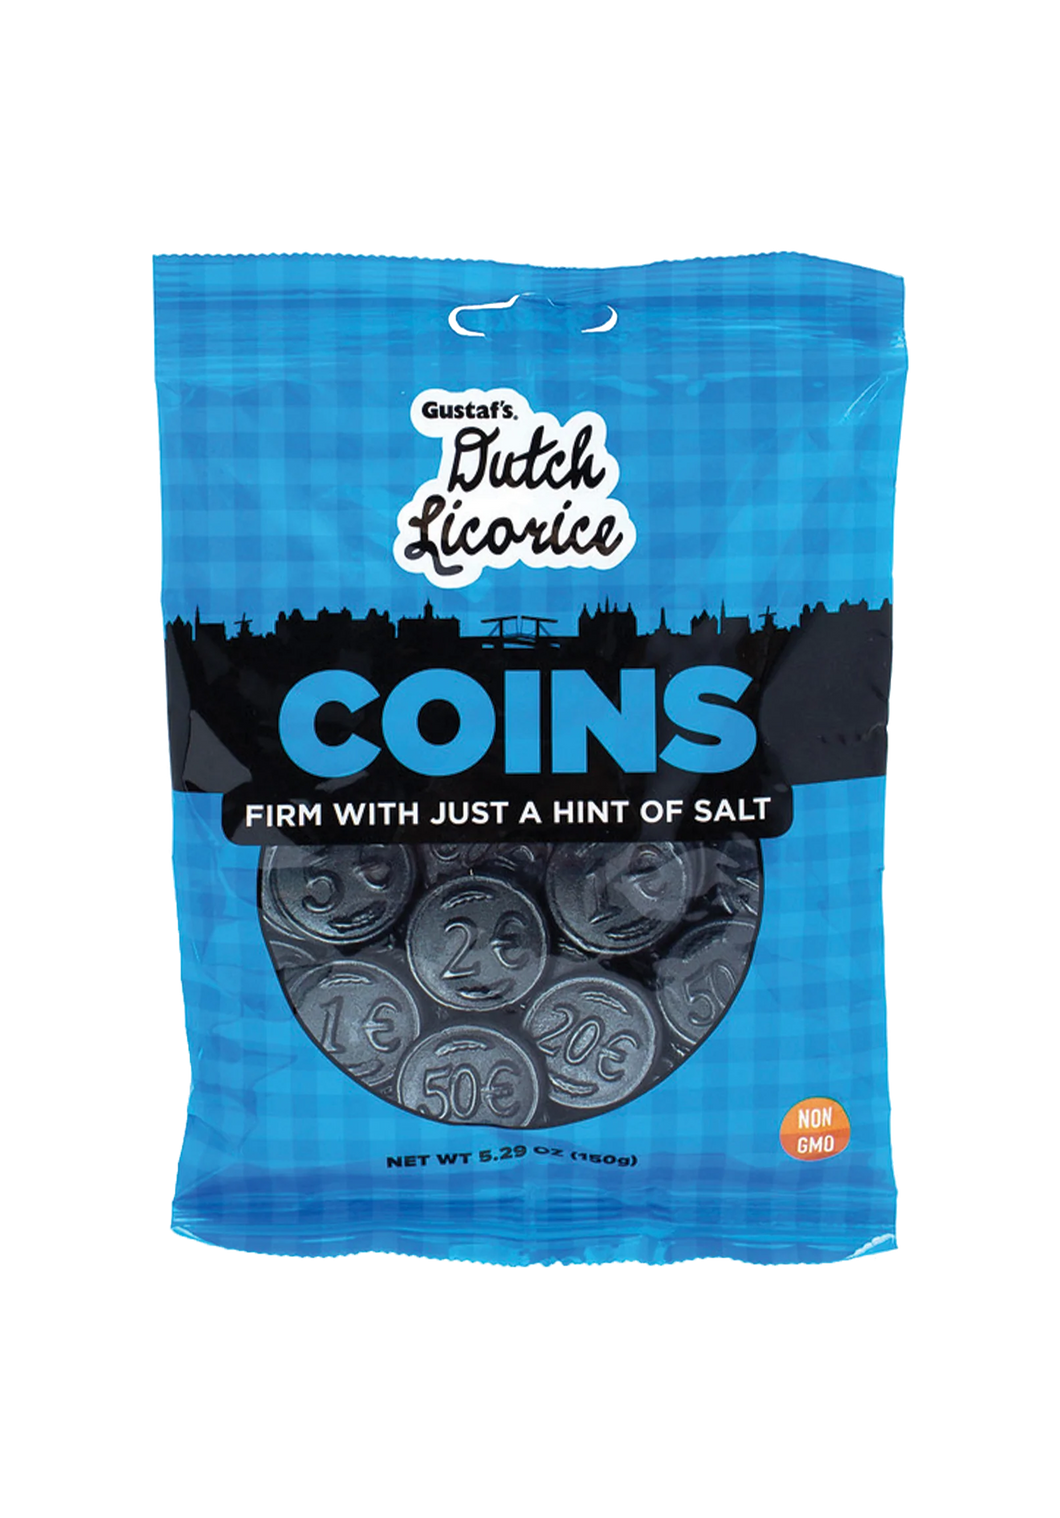 Gustaf's Dutch Licorice Coins Firm with Just a Hint of Salt 150g